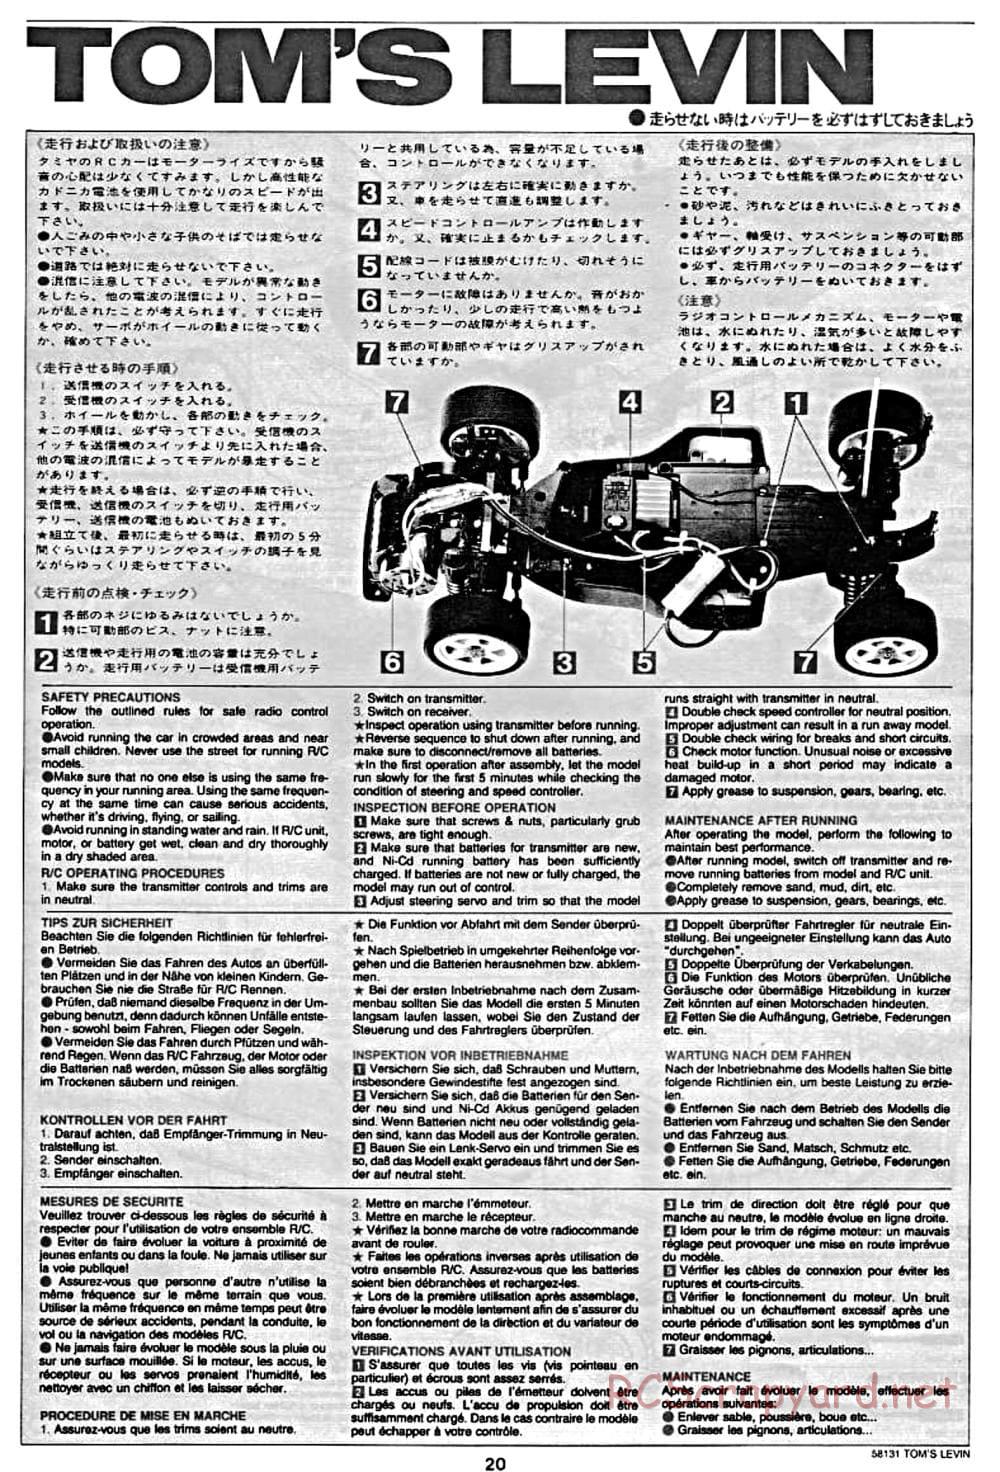 Tamiya - Toyota Tom's Levin - FF-01 Chassis - Manual - Page 20